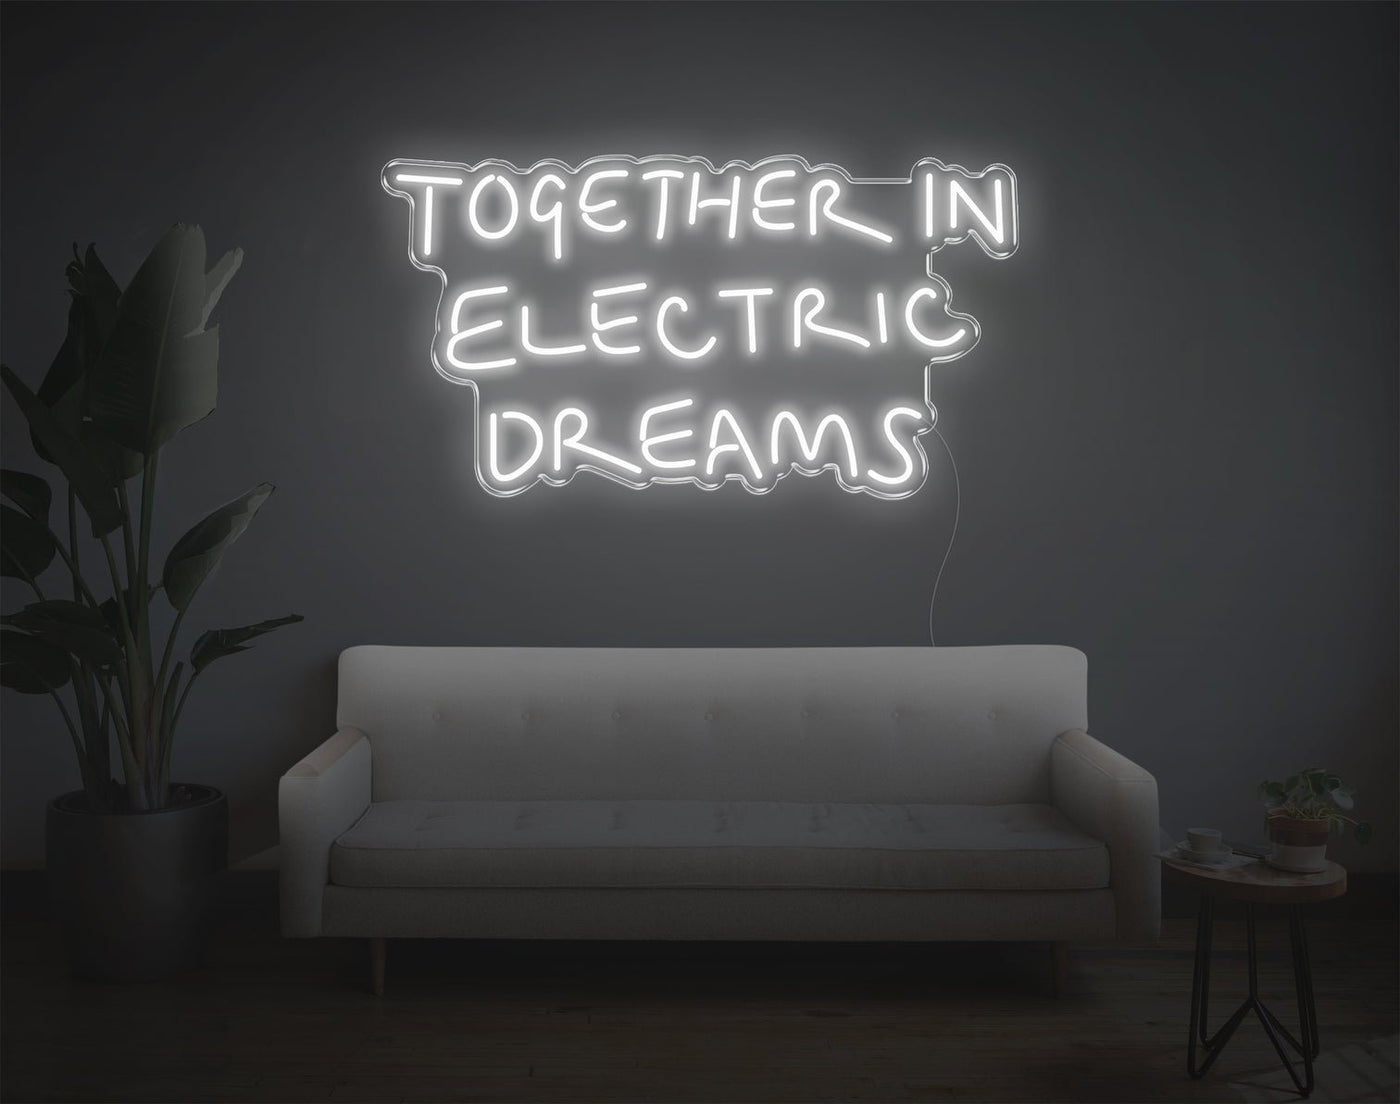 Together In Electric Dreams LED Neon Sign - 18inch x 33inchHot Pink